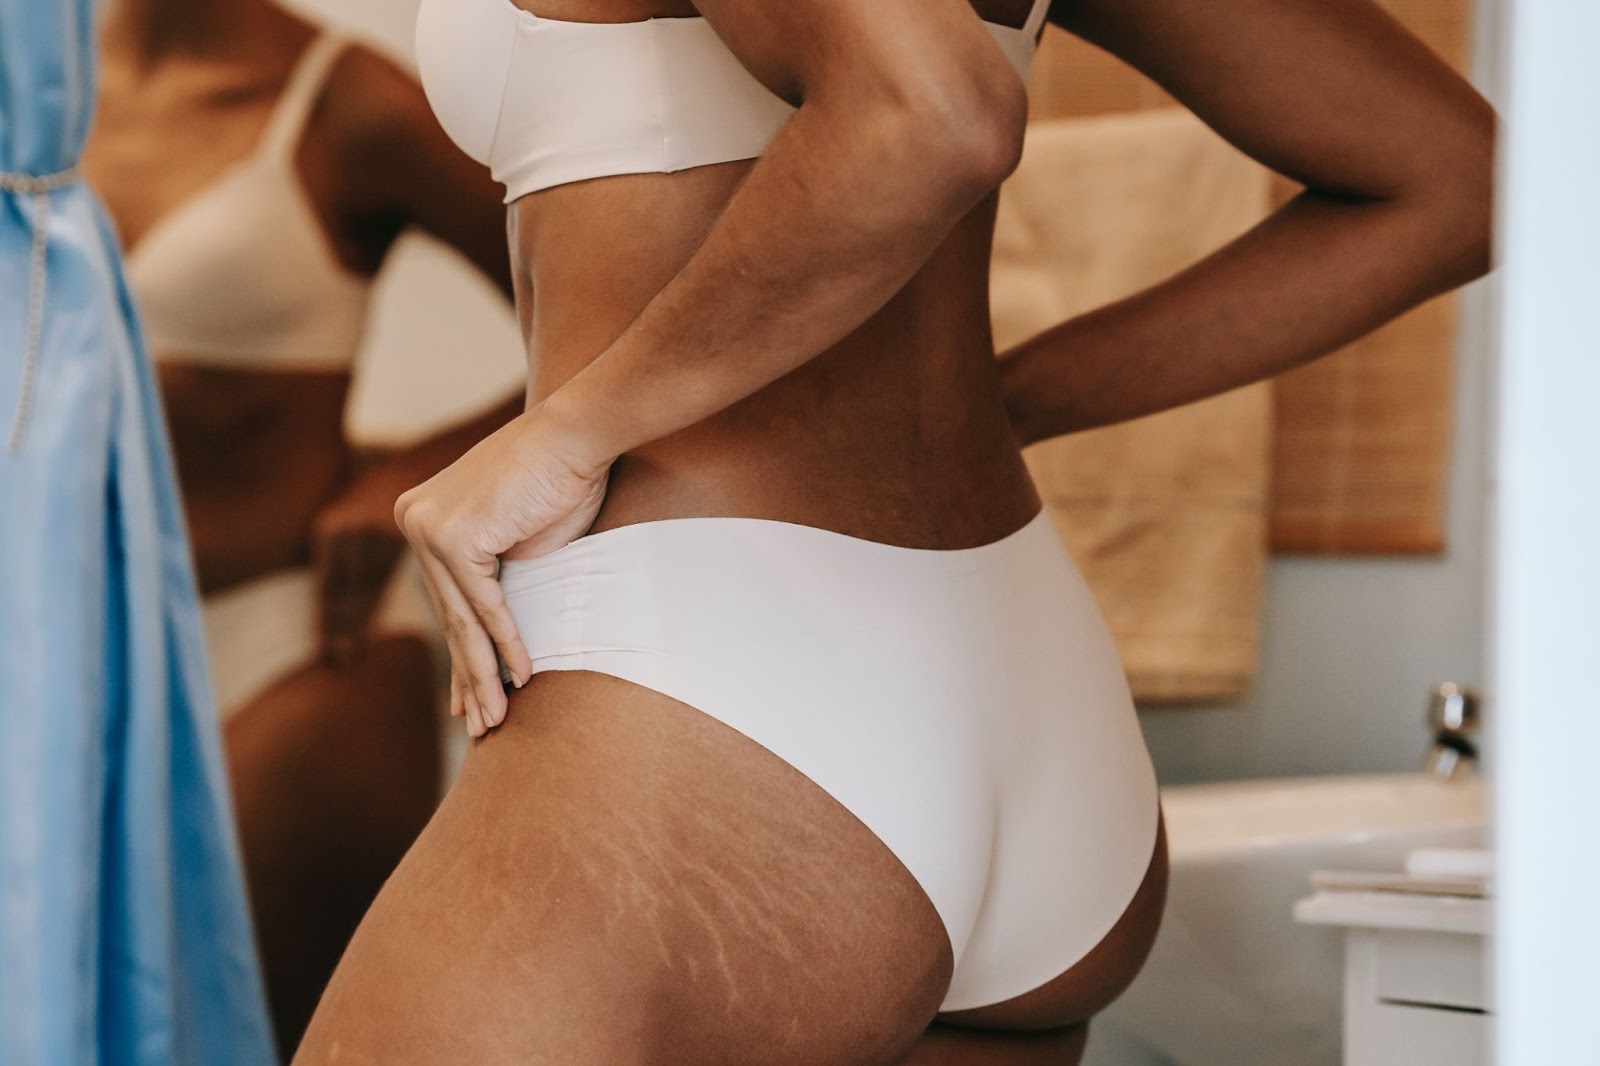 Your Thong Is Giving You Butt Acne, and Other Skin and Pimple Tips